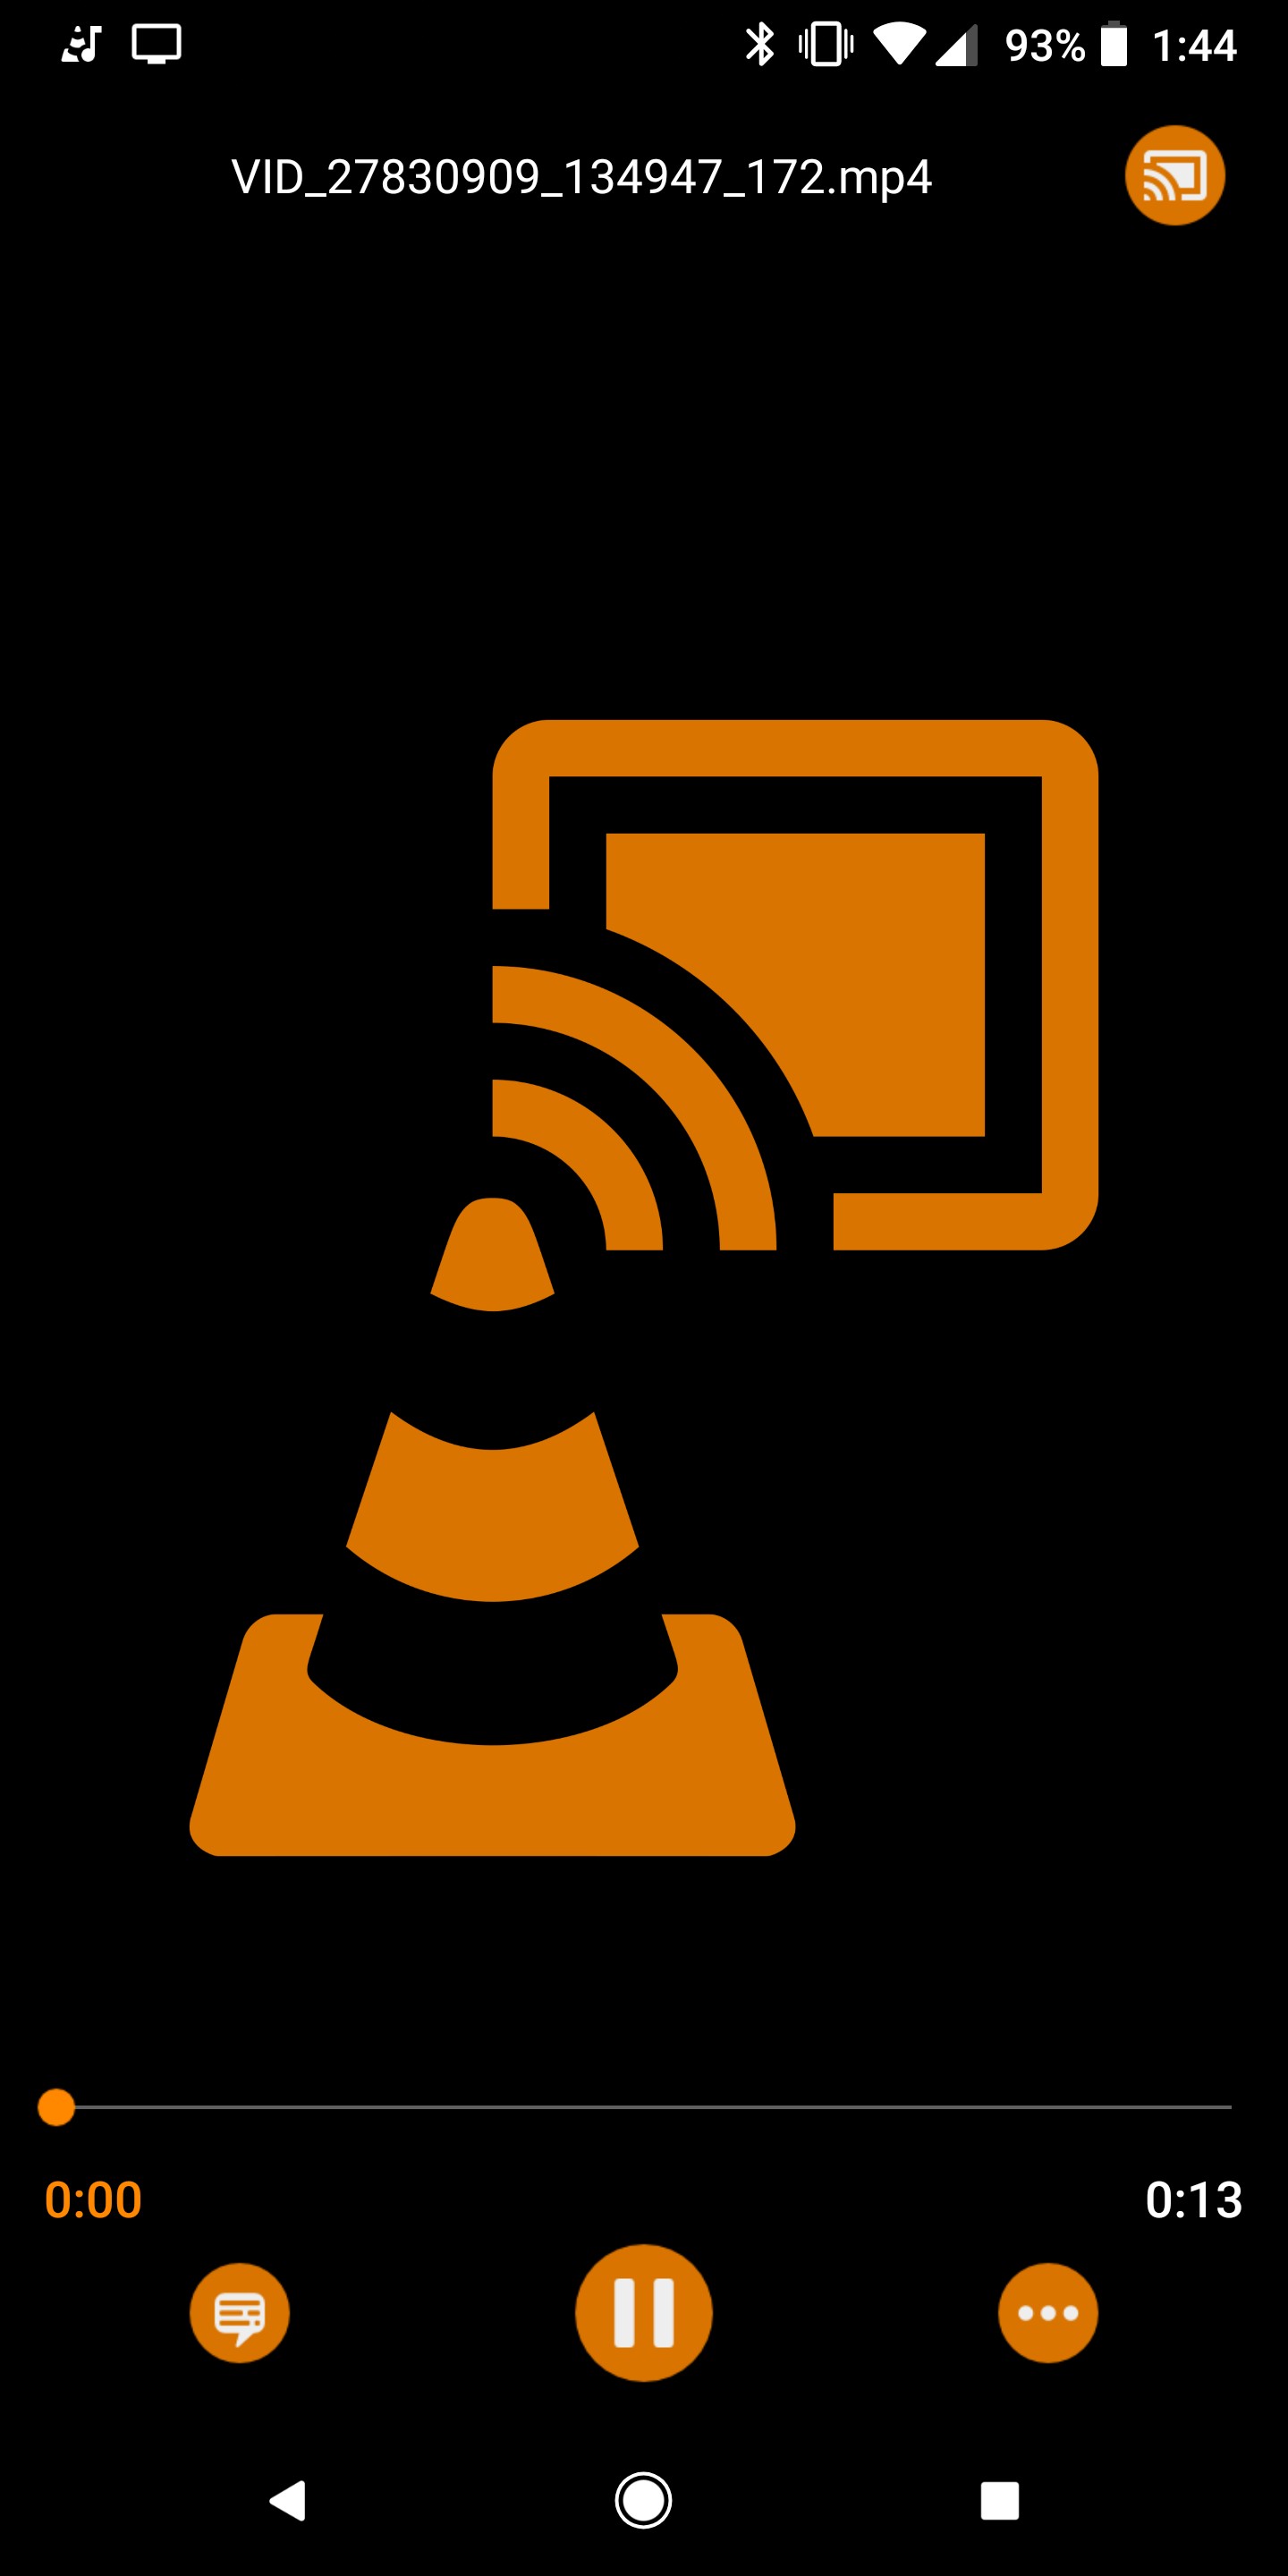 How to VLC to cast local content from Android or Windows to a Chromecast